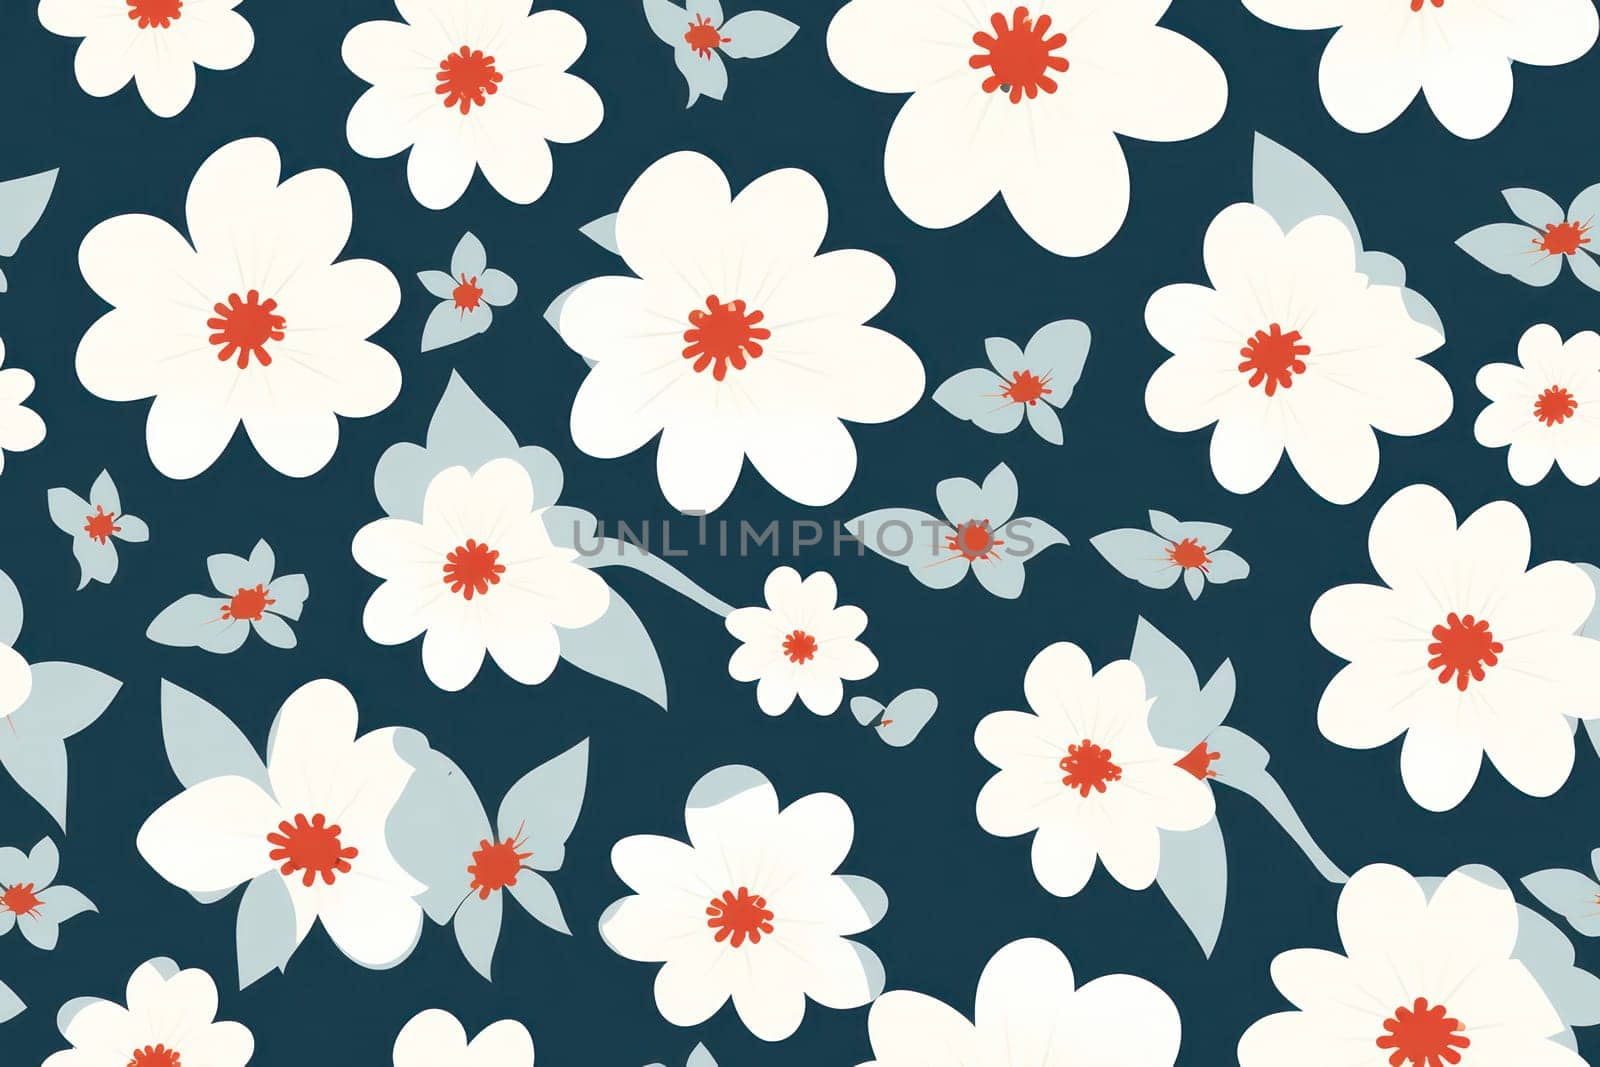 Blooming Floral Beauty: A Seamless Vintage Wallpaper Illustration of Pink Blossoms on a White Background by Vichizh